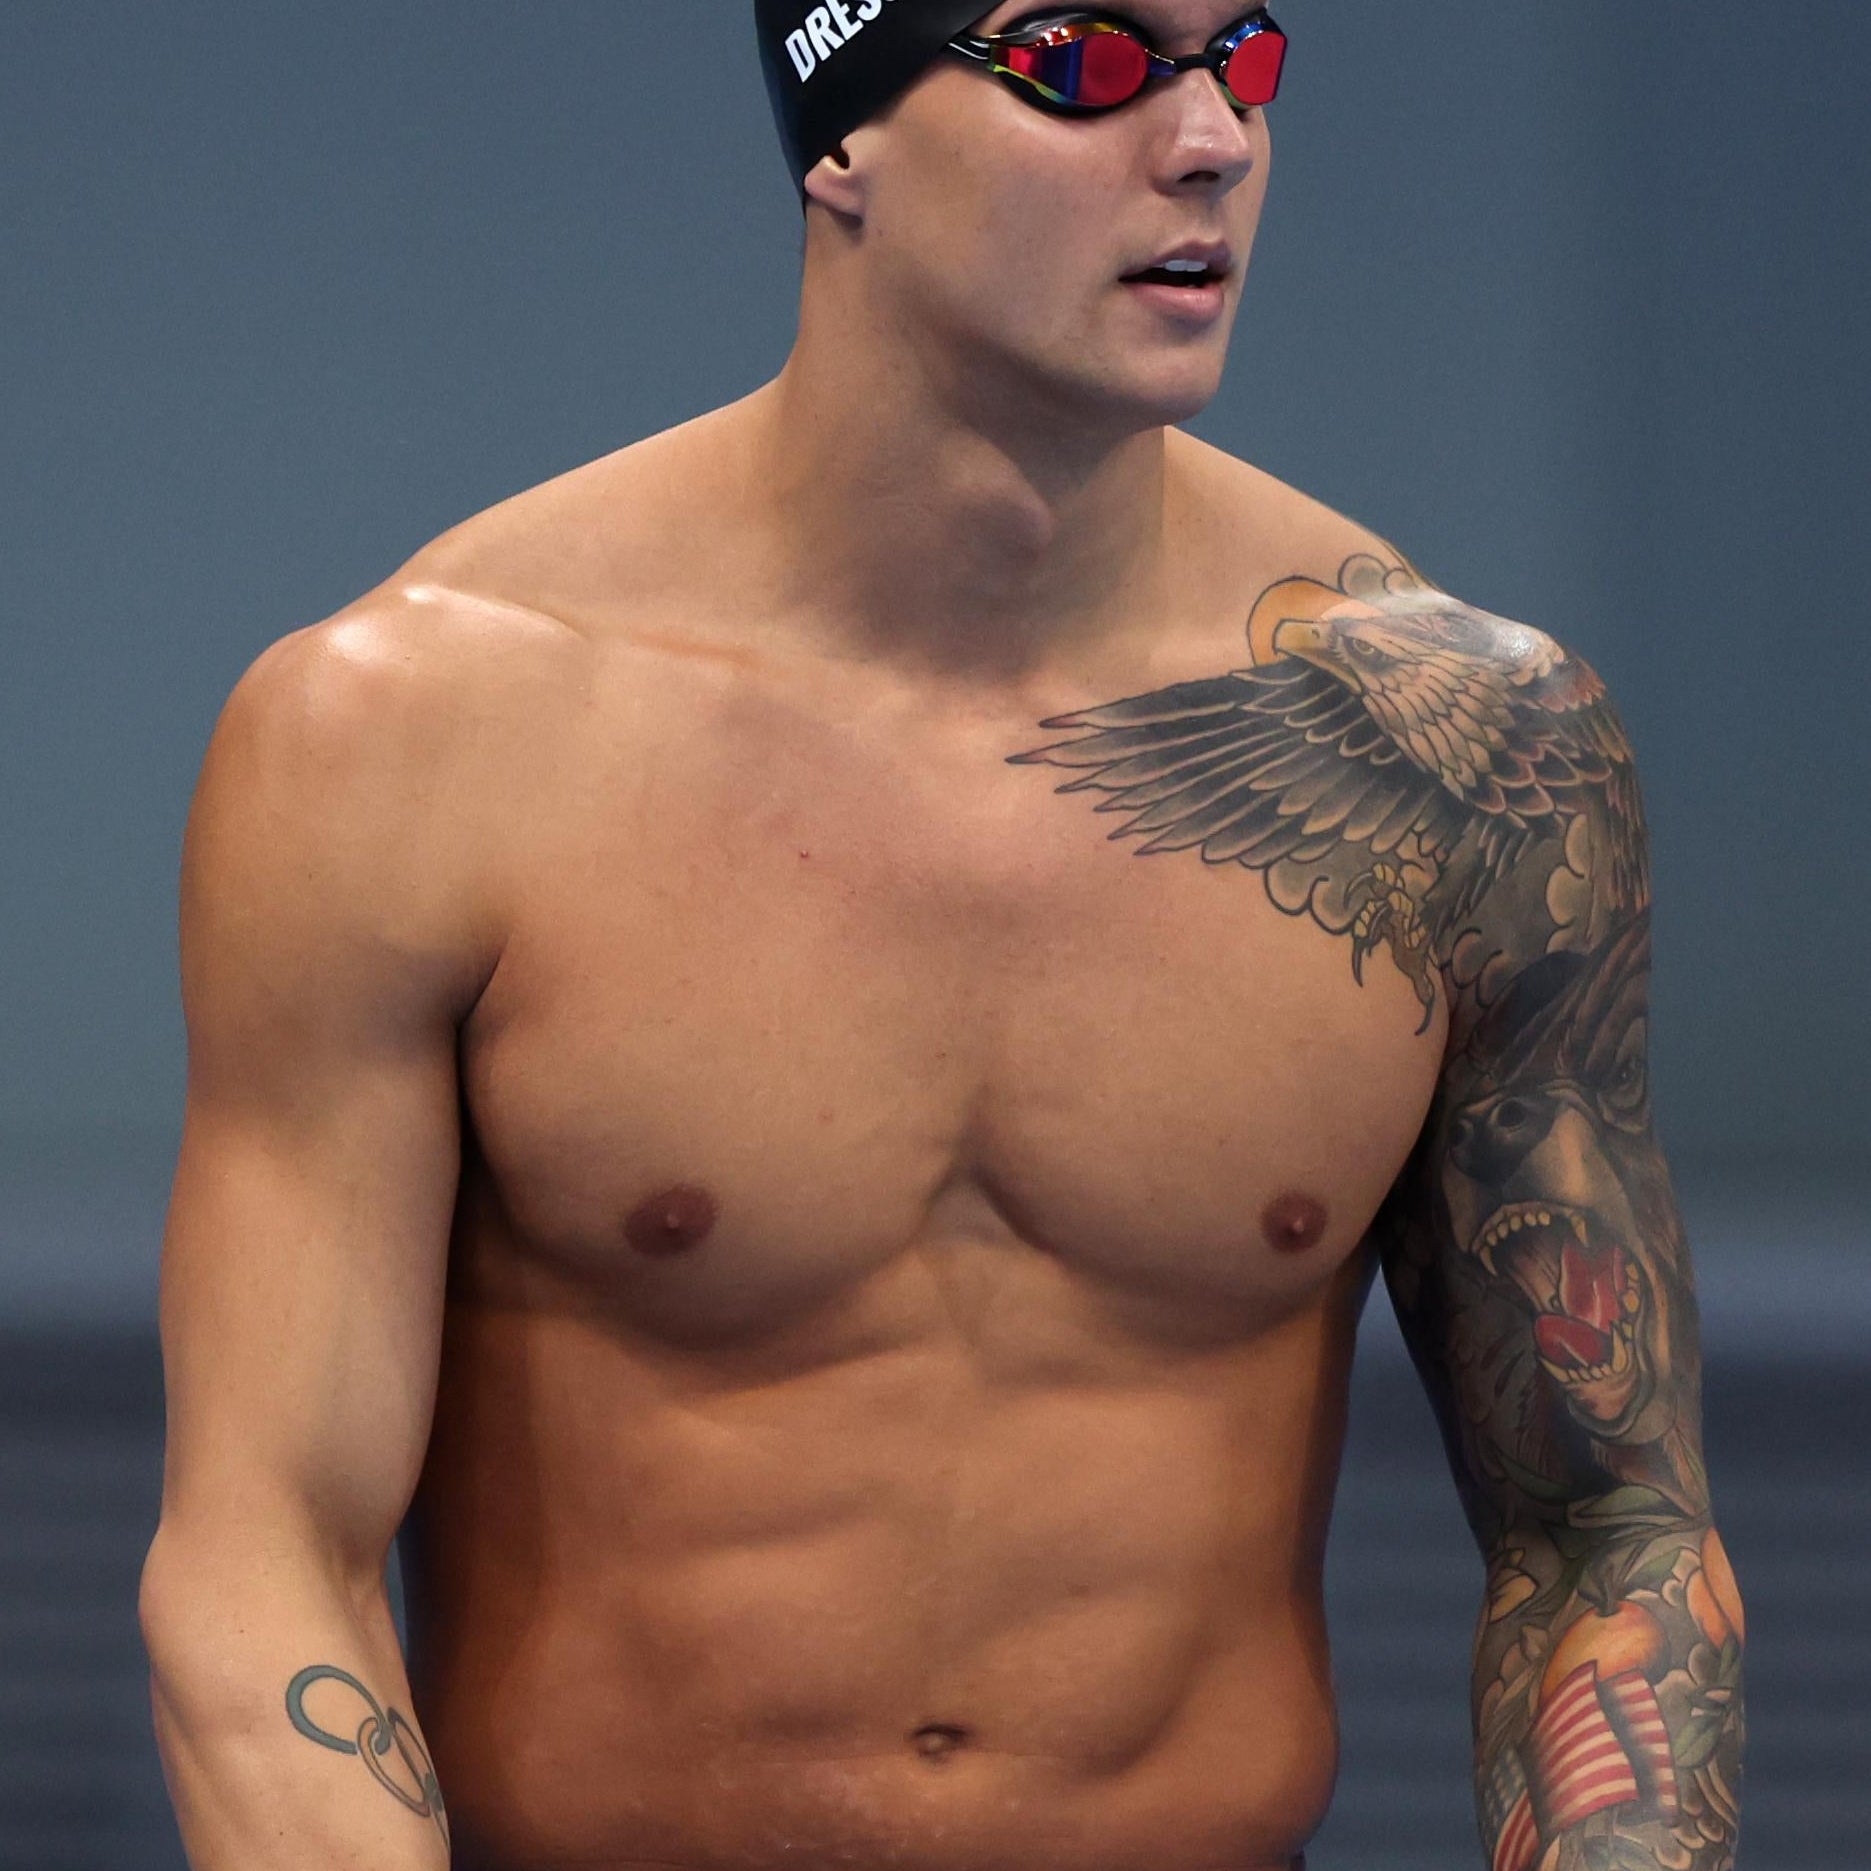 Dressel in goggles and swim cap, his left arm covered in the eagle, bear, oranges, and flag tattoo described below, a small Olympics rings tattoo visible as well on his right forearm